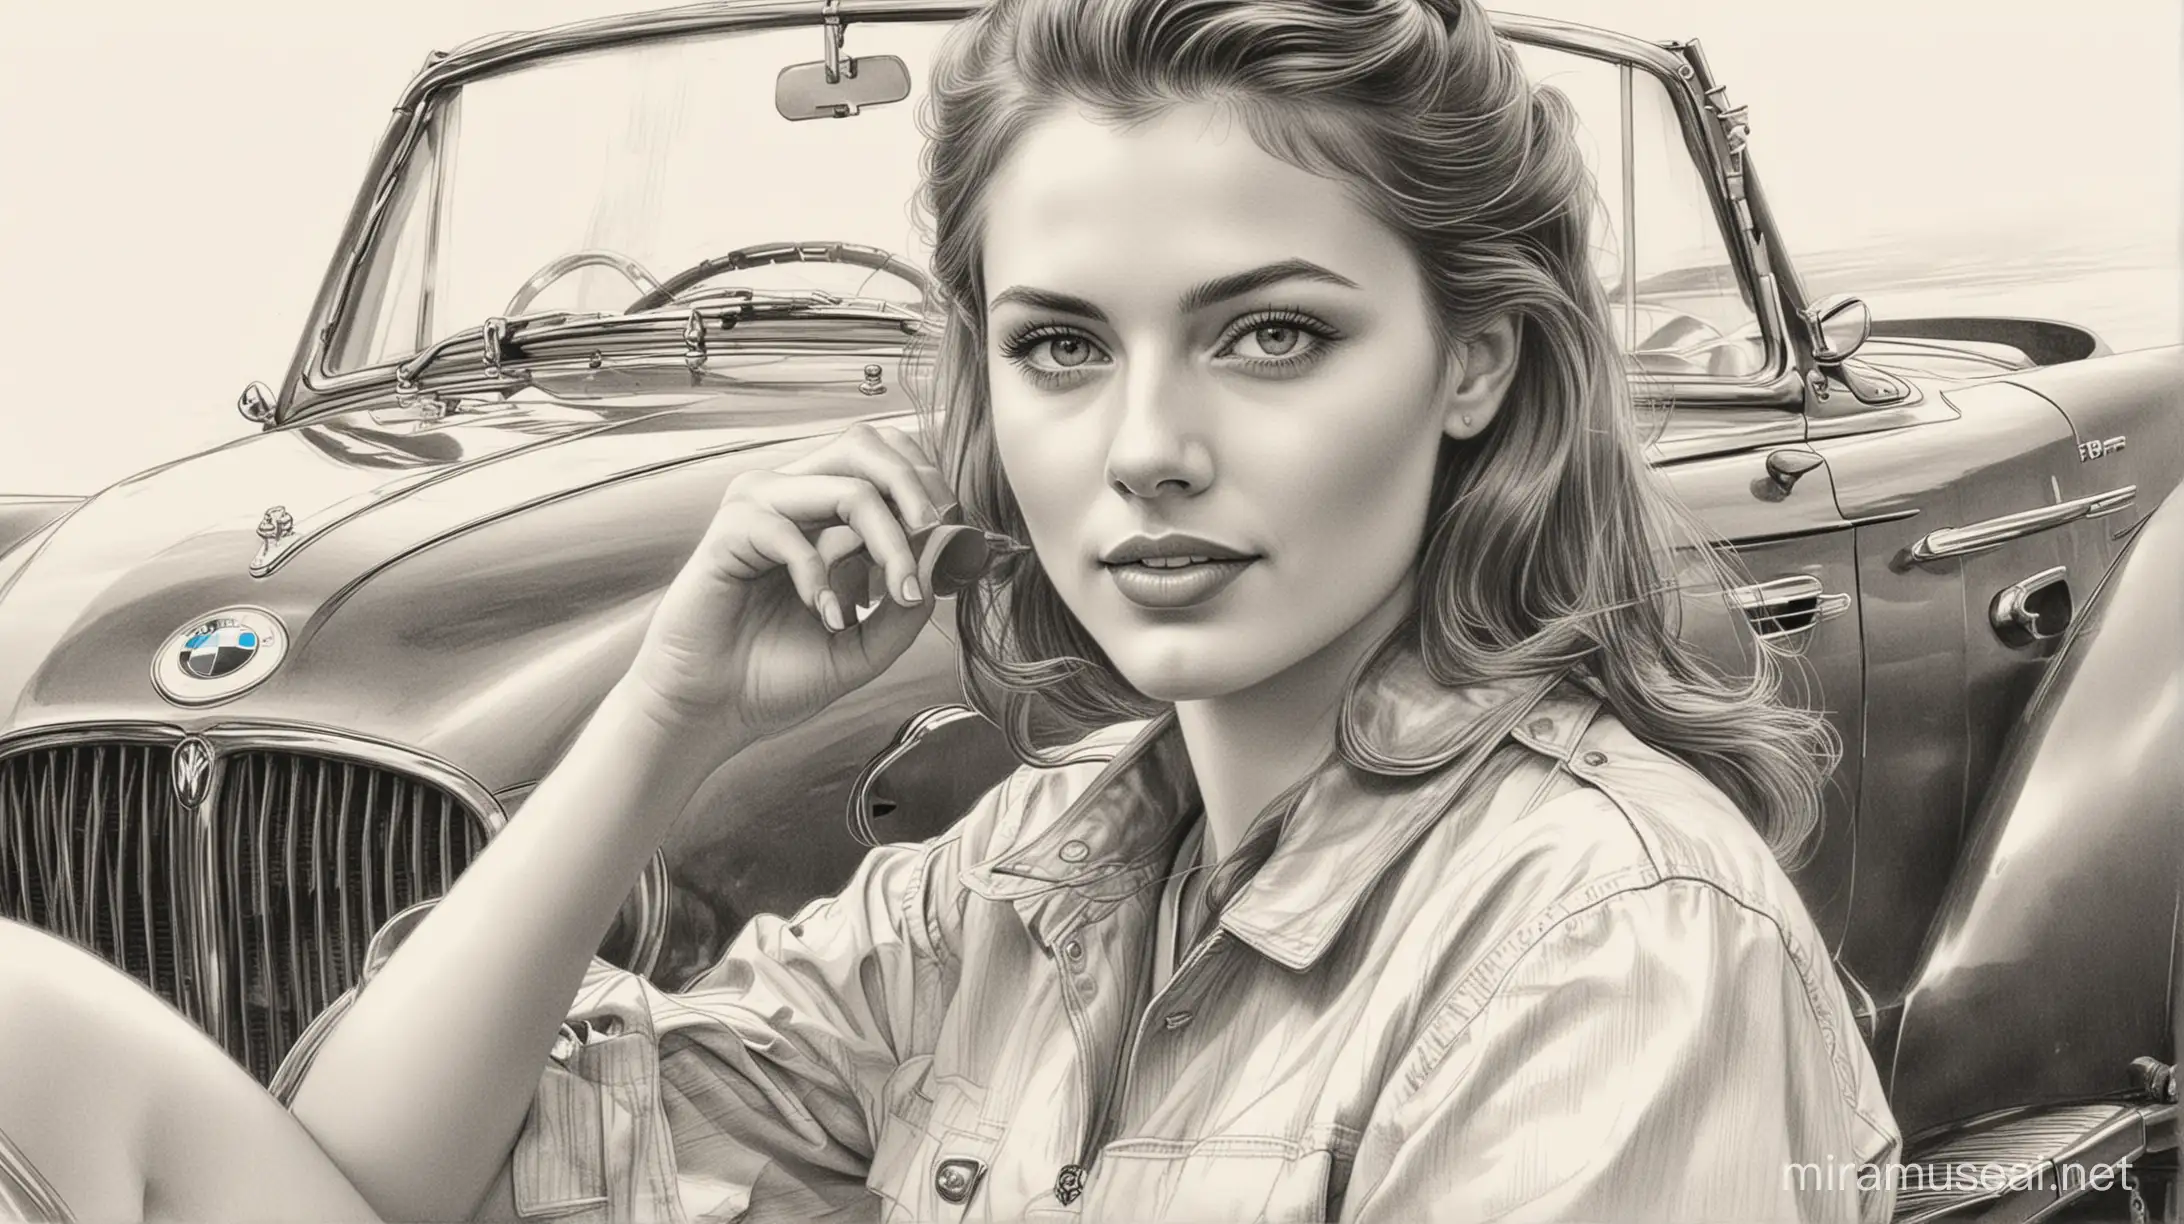 
Attractive girl in a sports BMW. 1940s pencil sketch style graphic